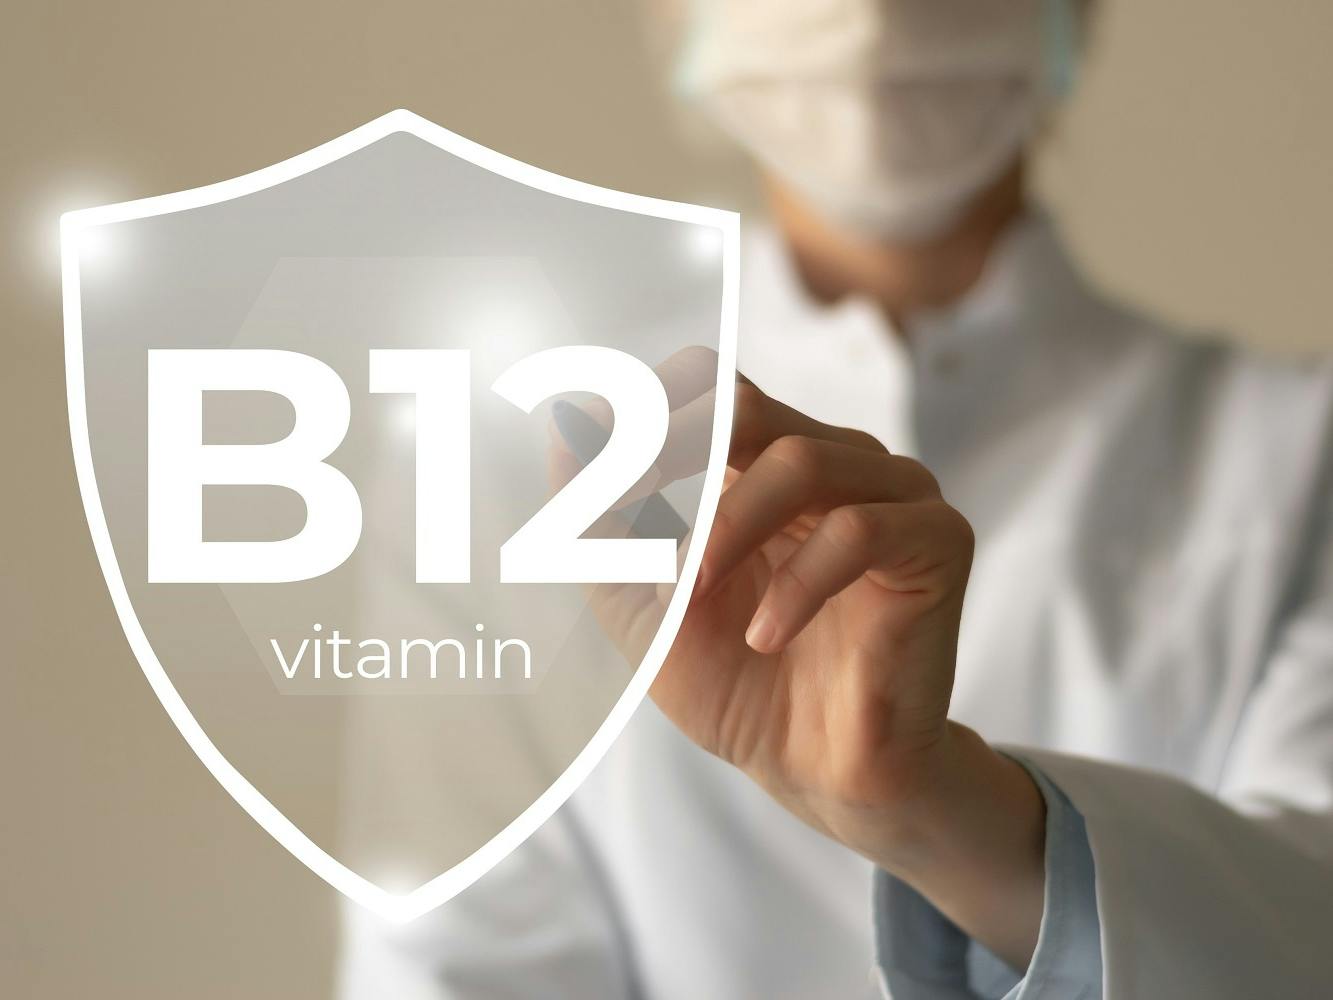 Does Medicare Pay for B12 Shots